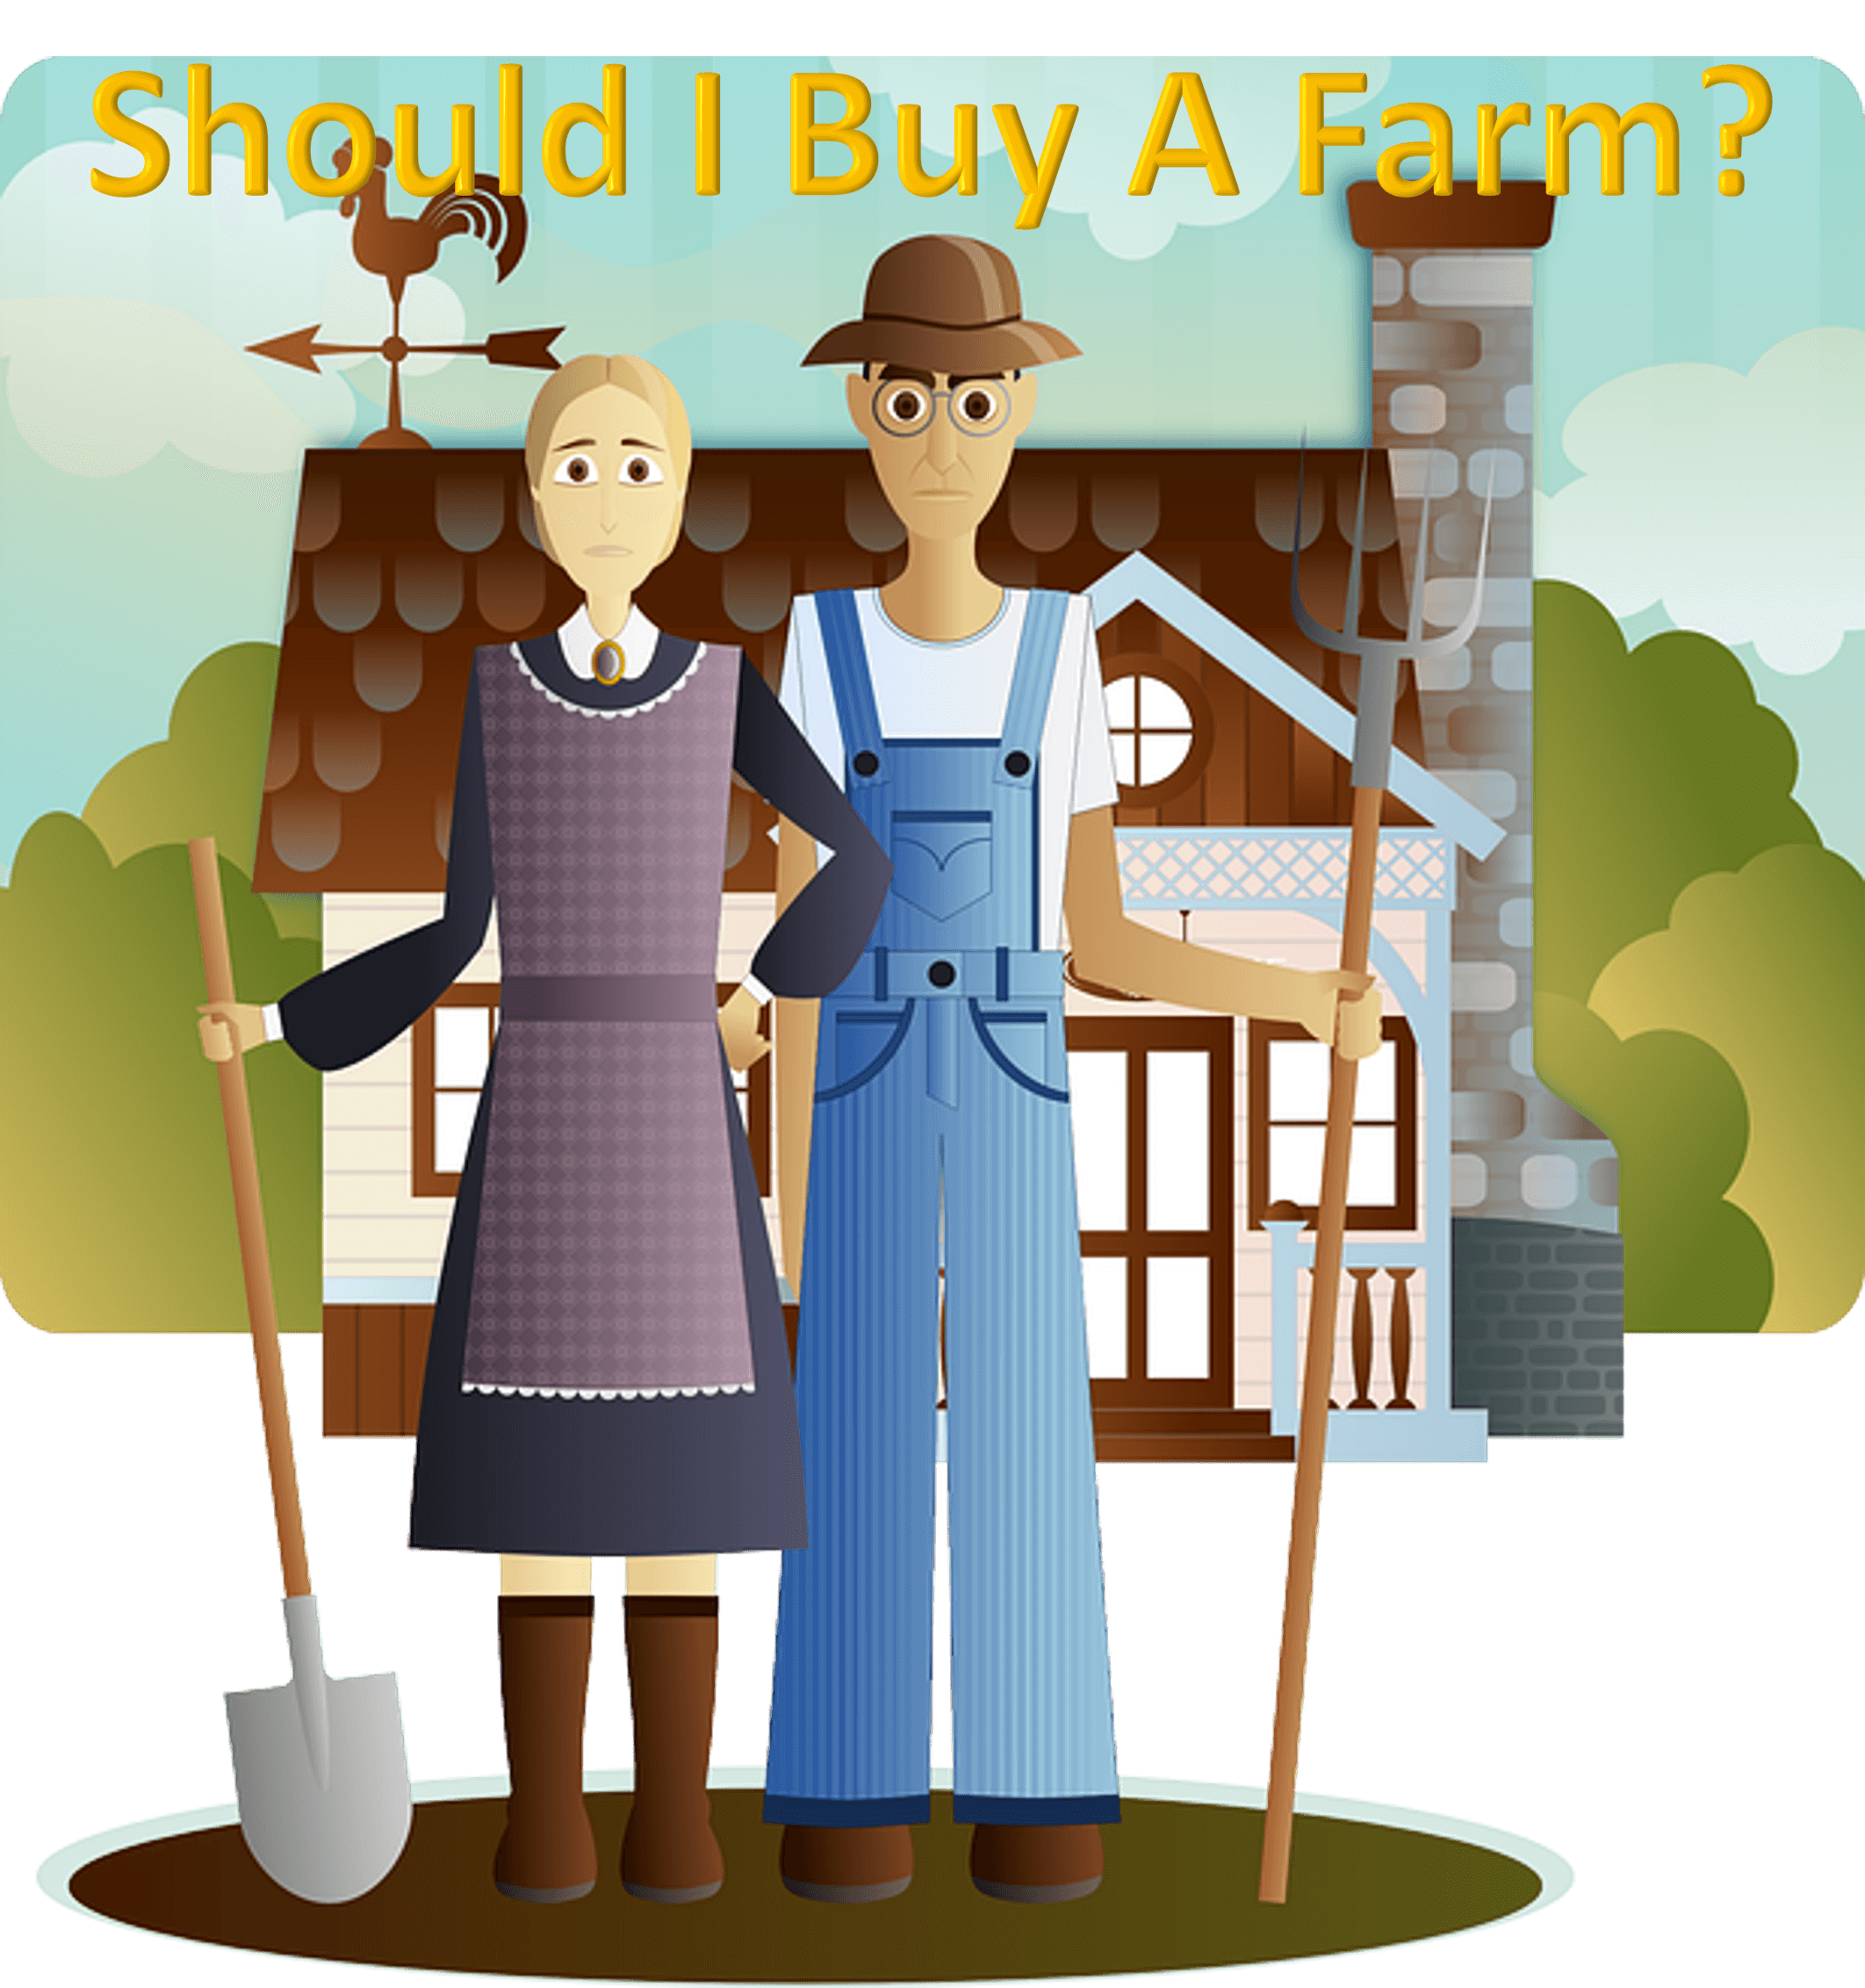 There are obvious and some not-so-obvious factors to consider when answering the question 'Should I buy a farm'